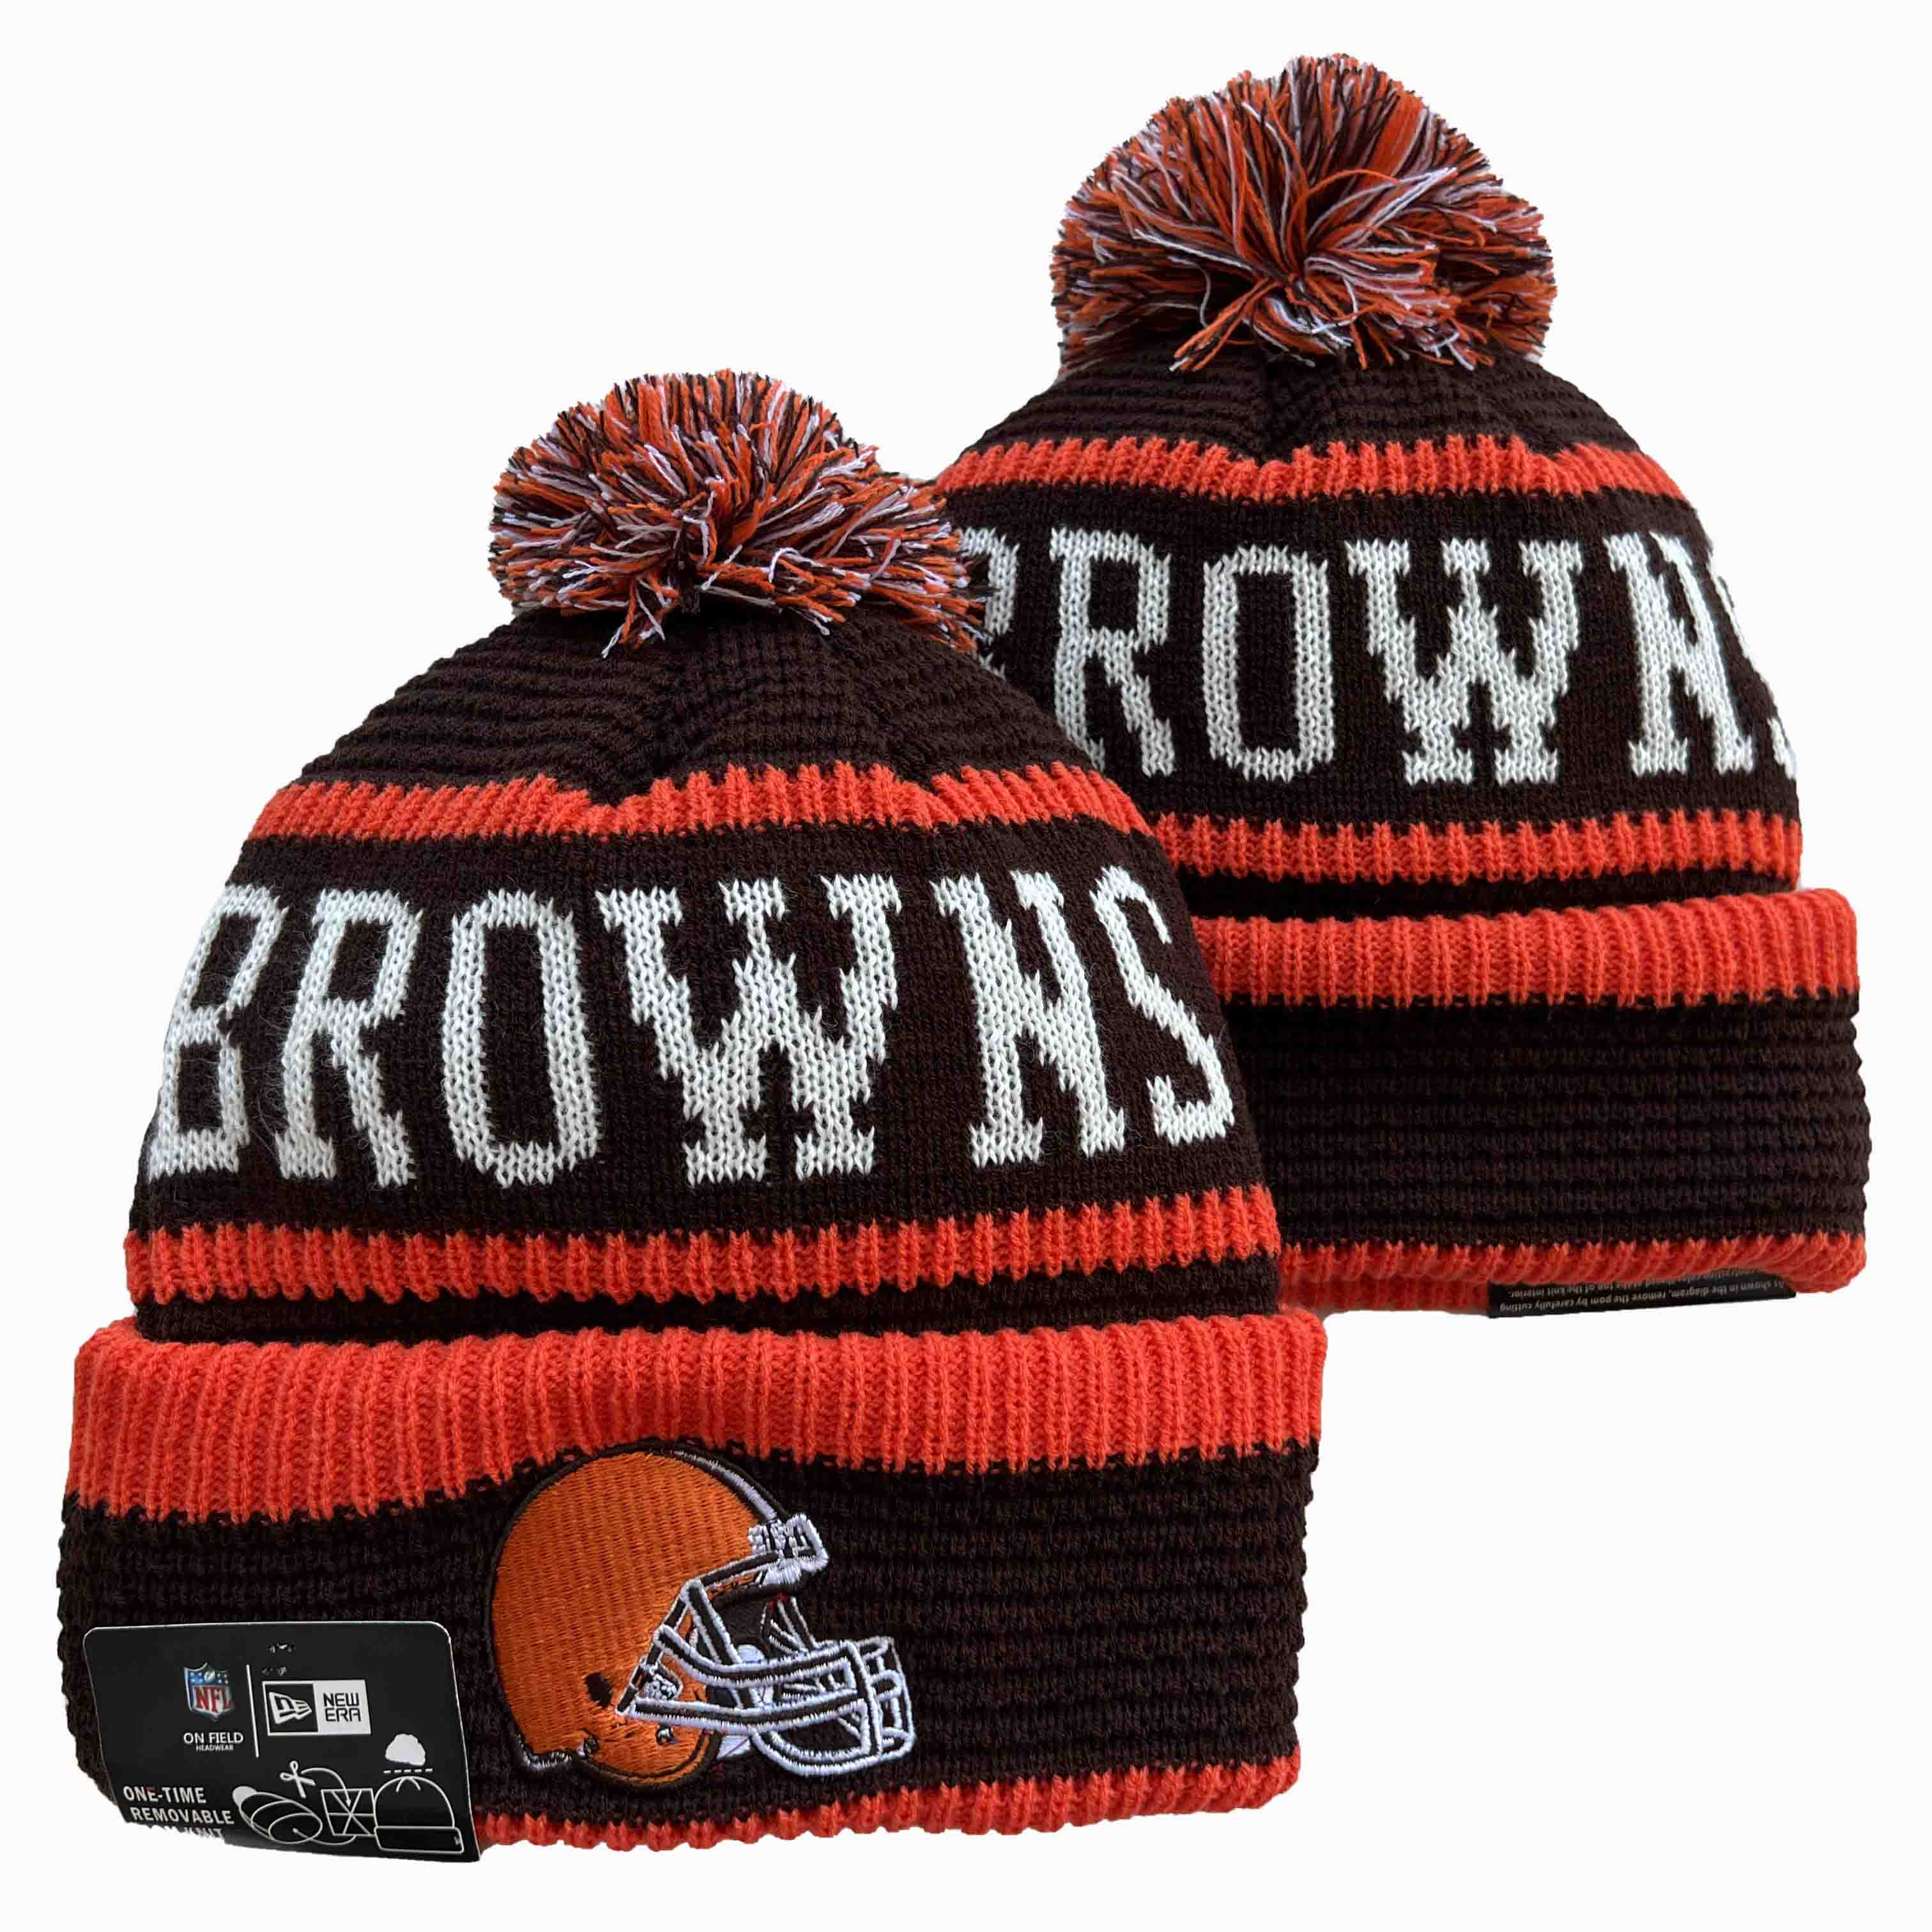 NFL Cleveland Browns Beanies Knit Hats-YD1298